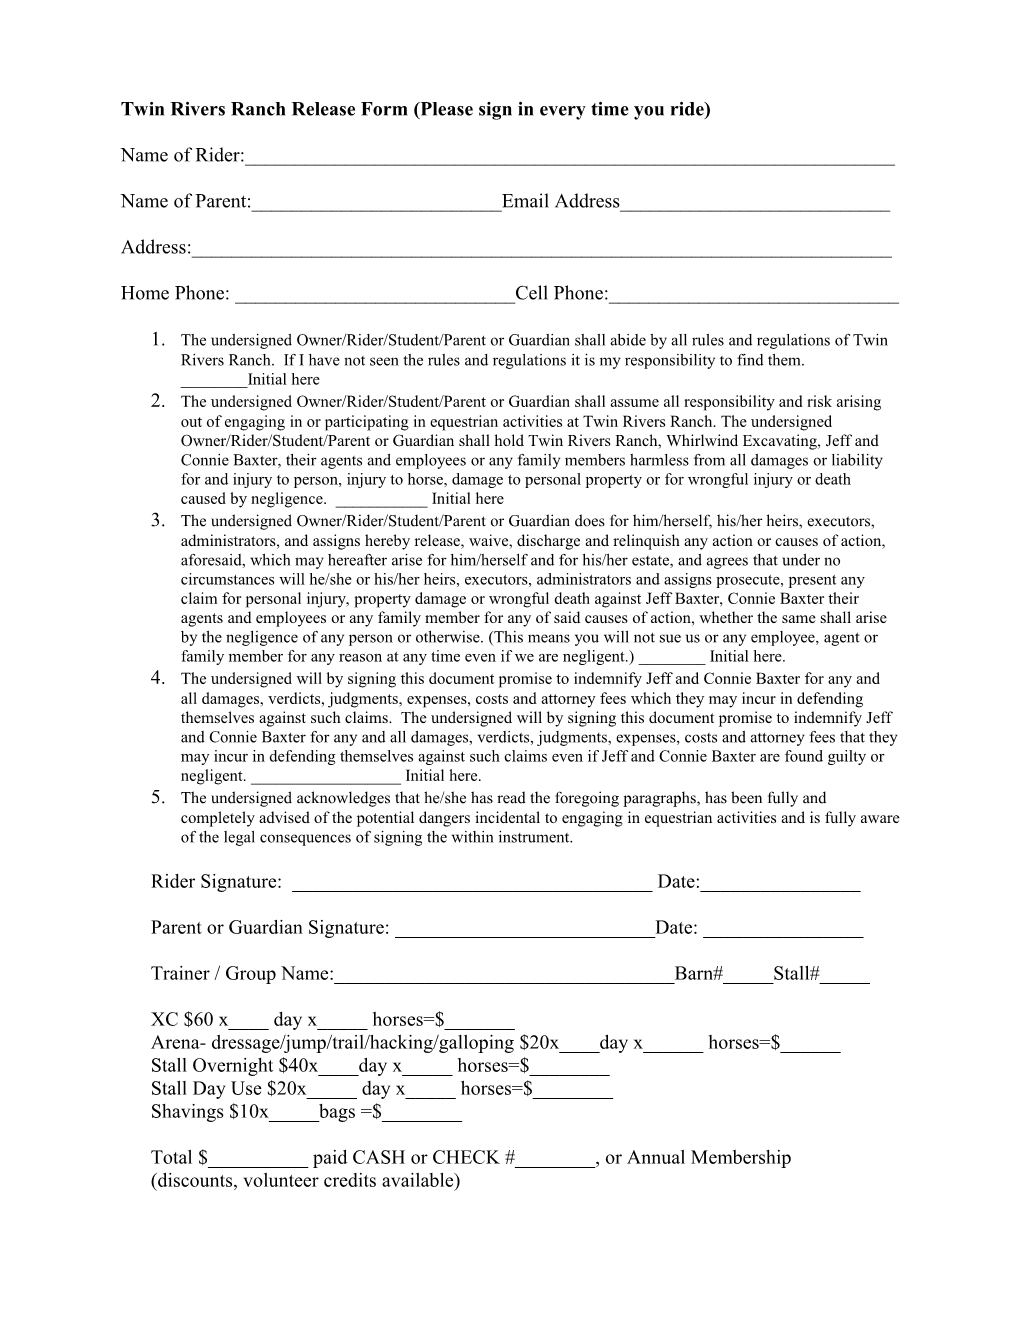 Twin Rivers Ranch Release Form (Please Sign in Every Time You Ride)